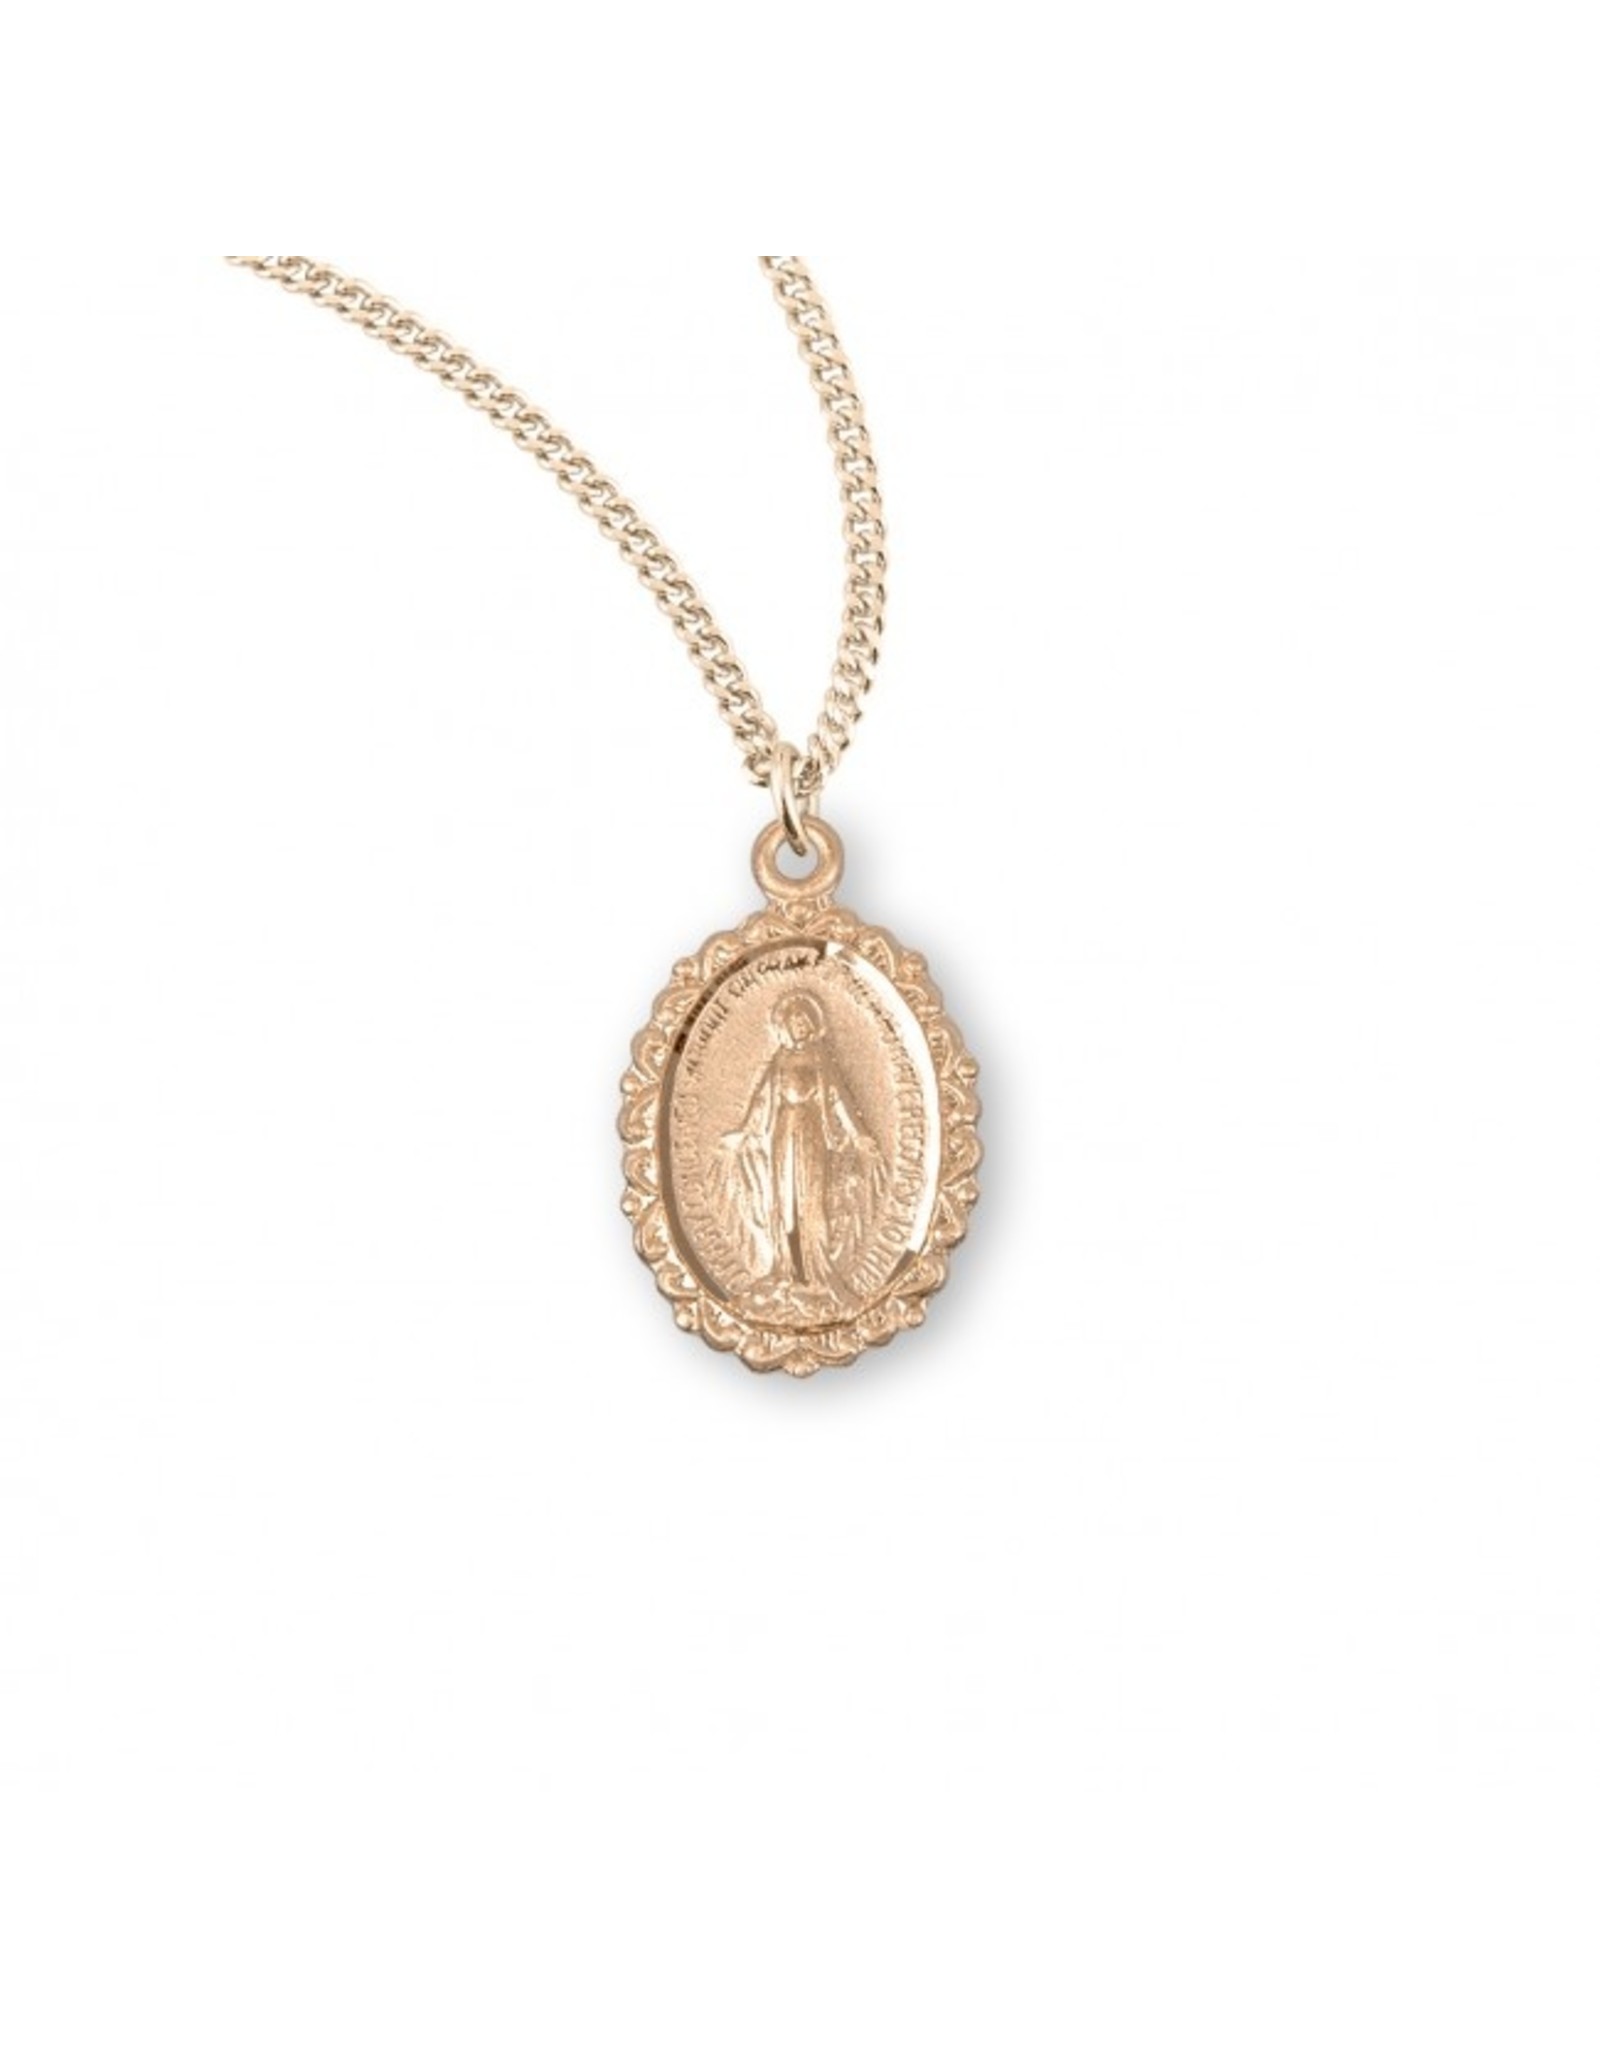 HMH Miraculous Medal, Oval, Gold over Sterling Silver, 18" Chain